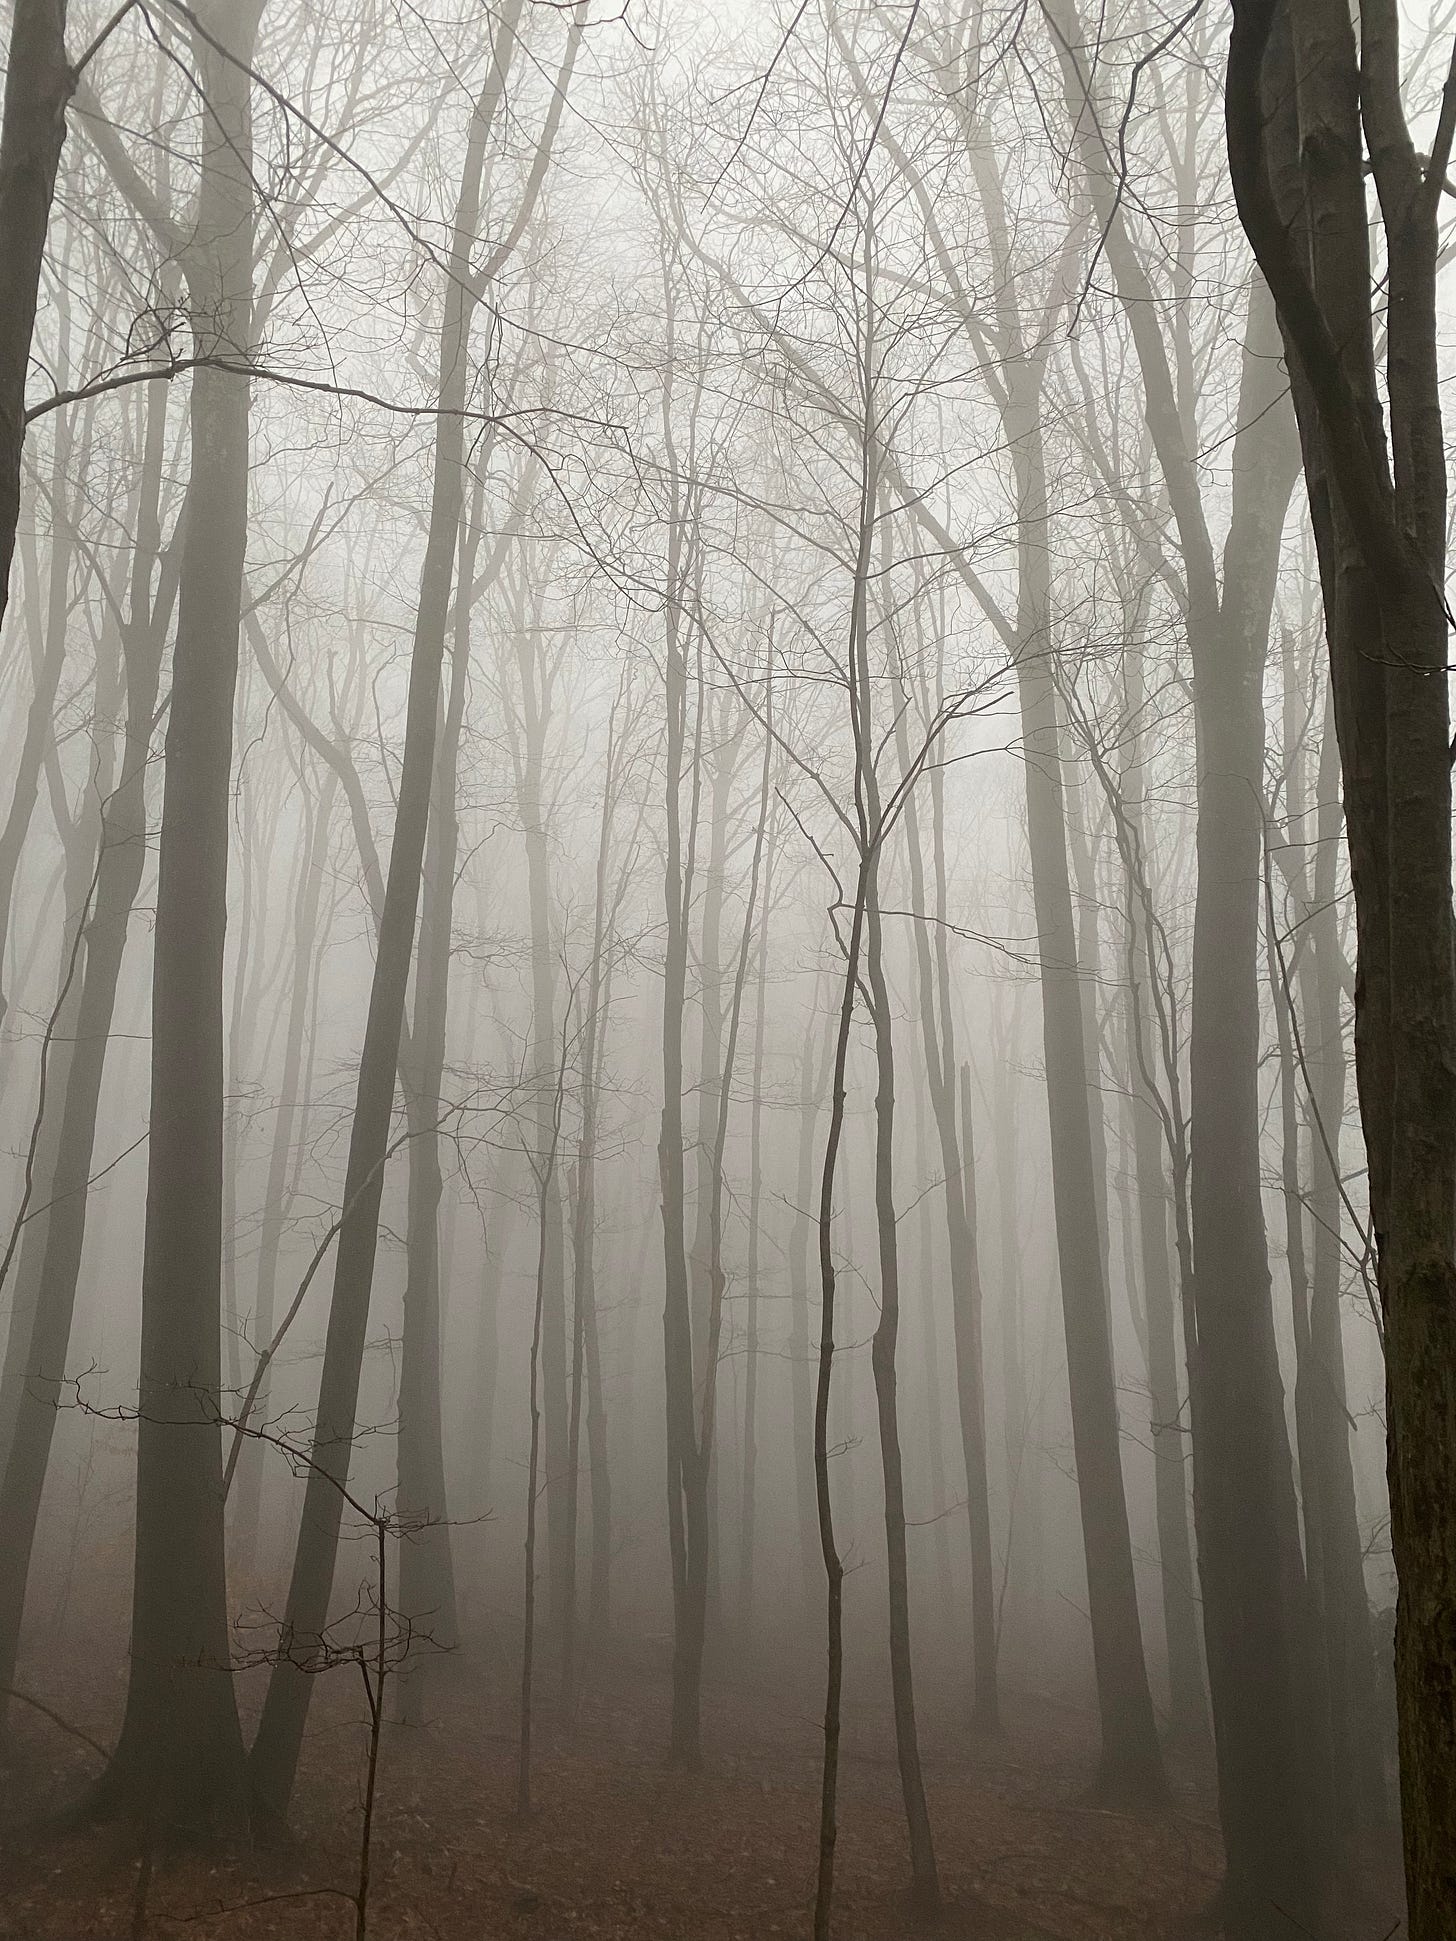 A stand of tall dark trees silhouetted and partially obscured by silver mist. 